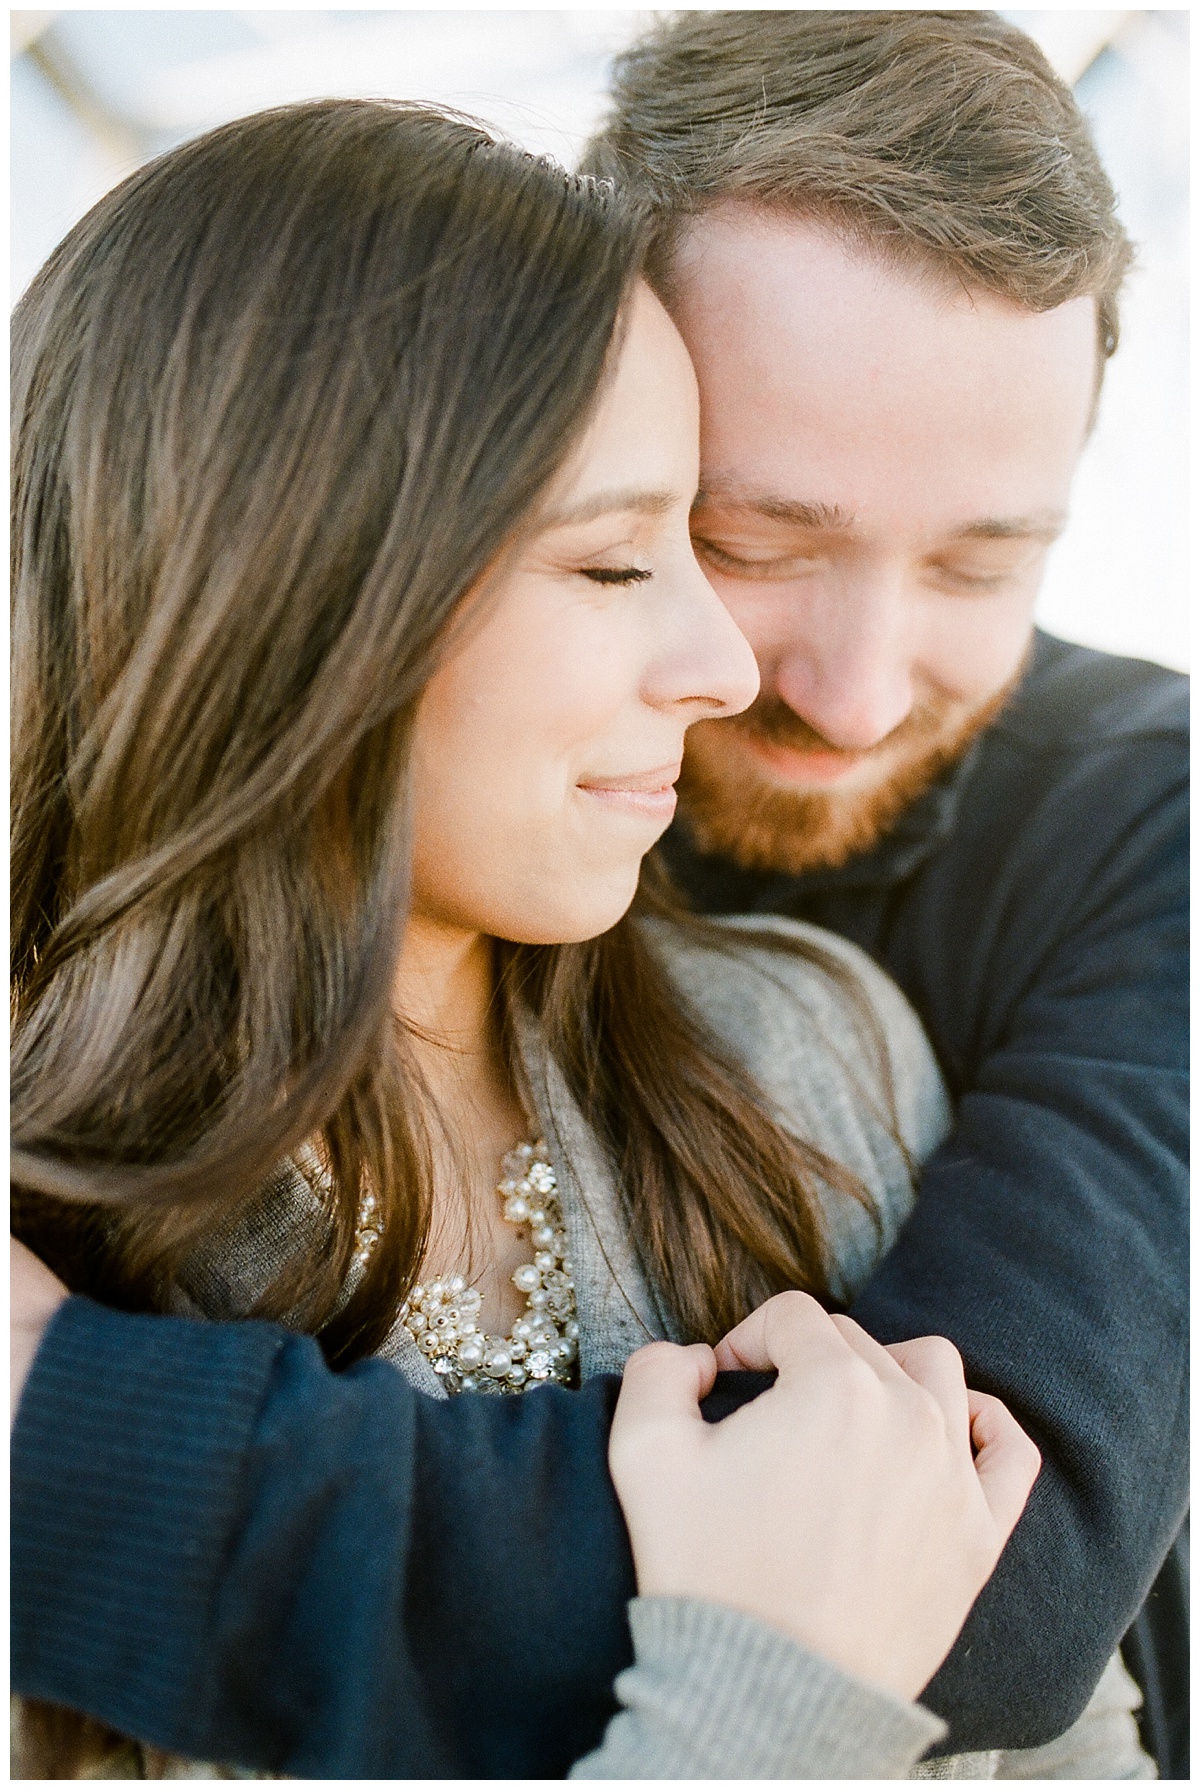 Downtown Nashville Maternity Session with Grace Paul Photography.